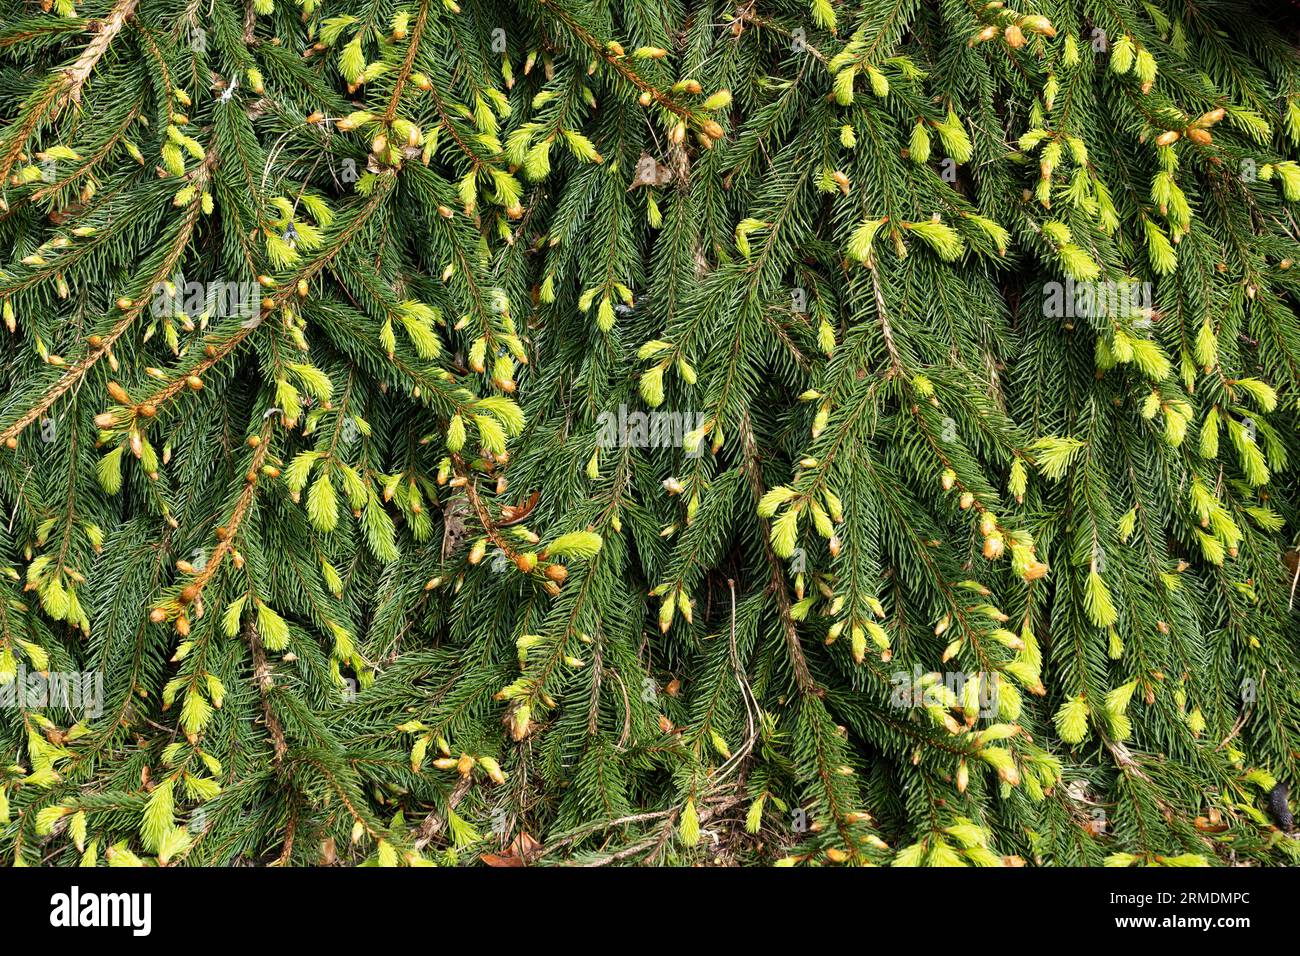 Picea abies Reflexa or Weeping Norway Spruce natural green background in spring, plant with weeping or cascading foliage in the family Pinaceae. Stock Photo